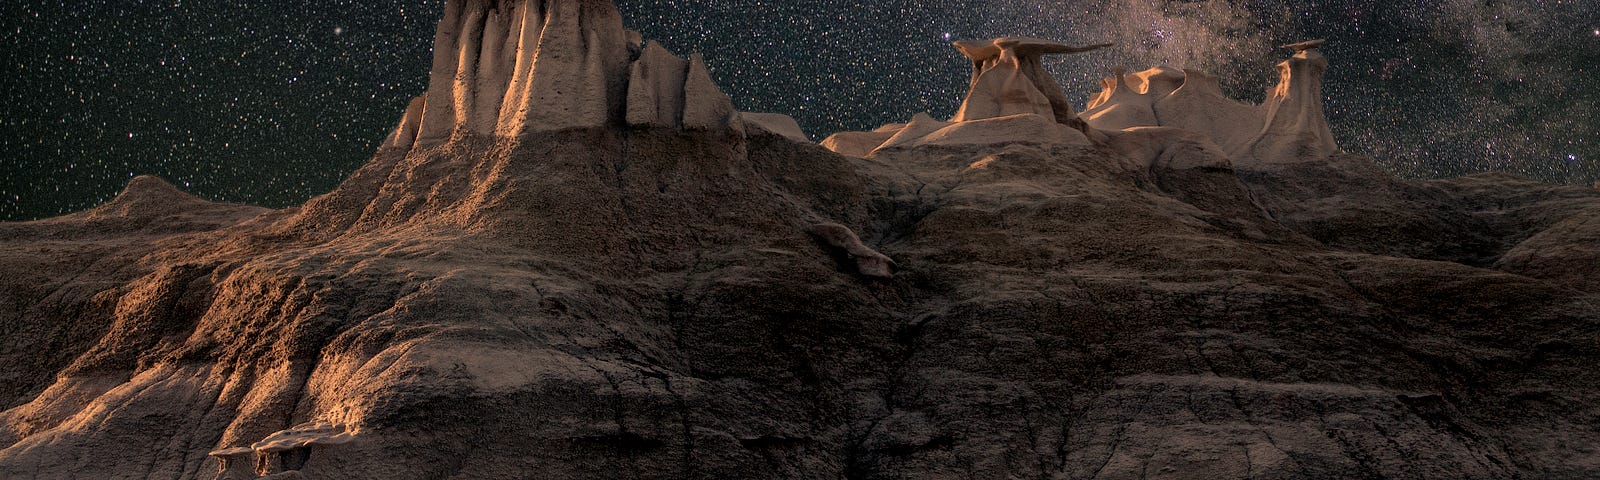 A mysterious stony structure, starry sky in the background